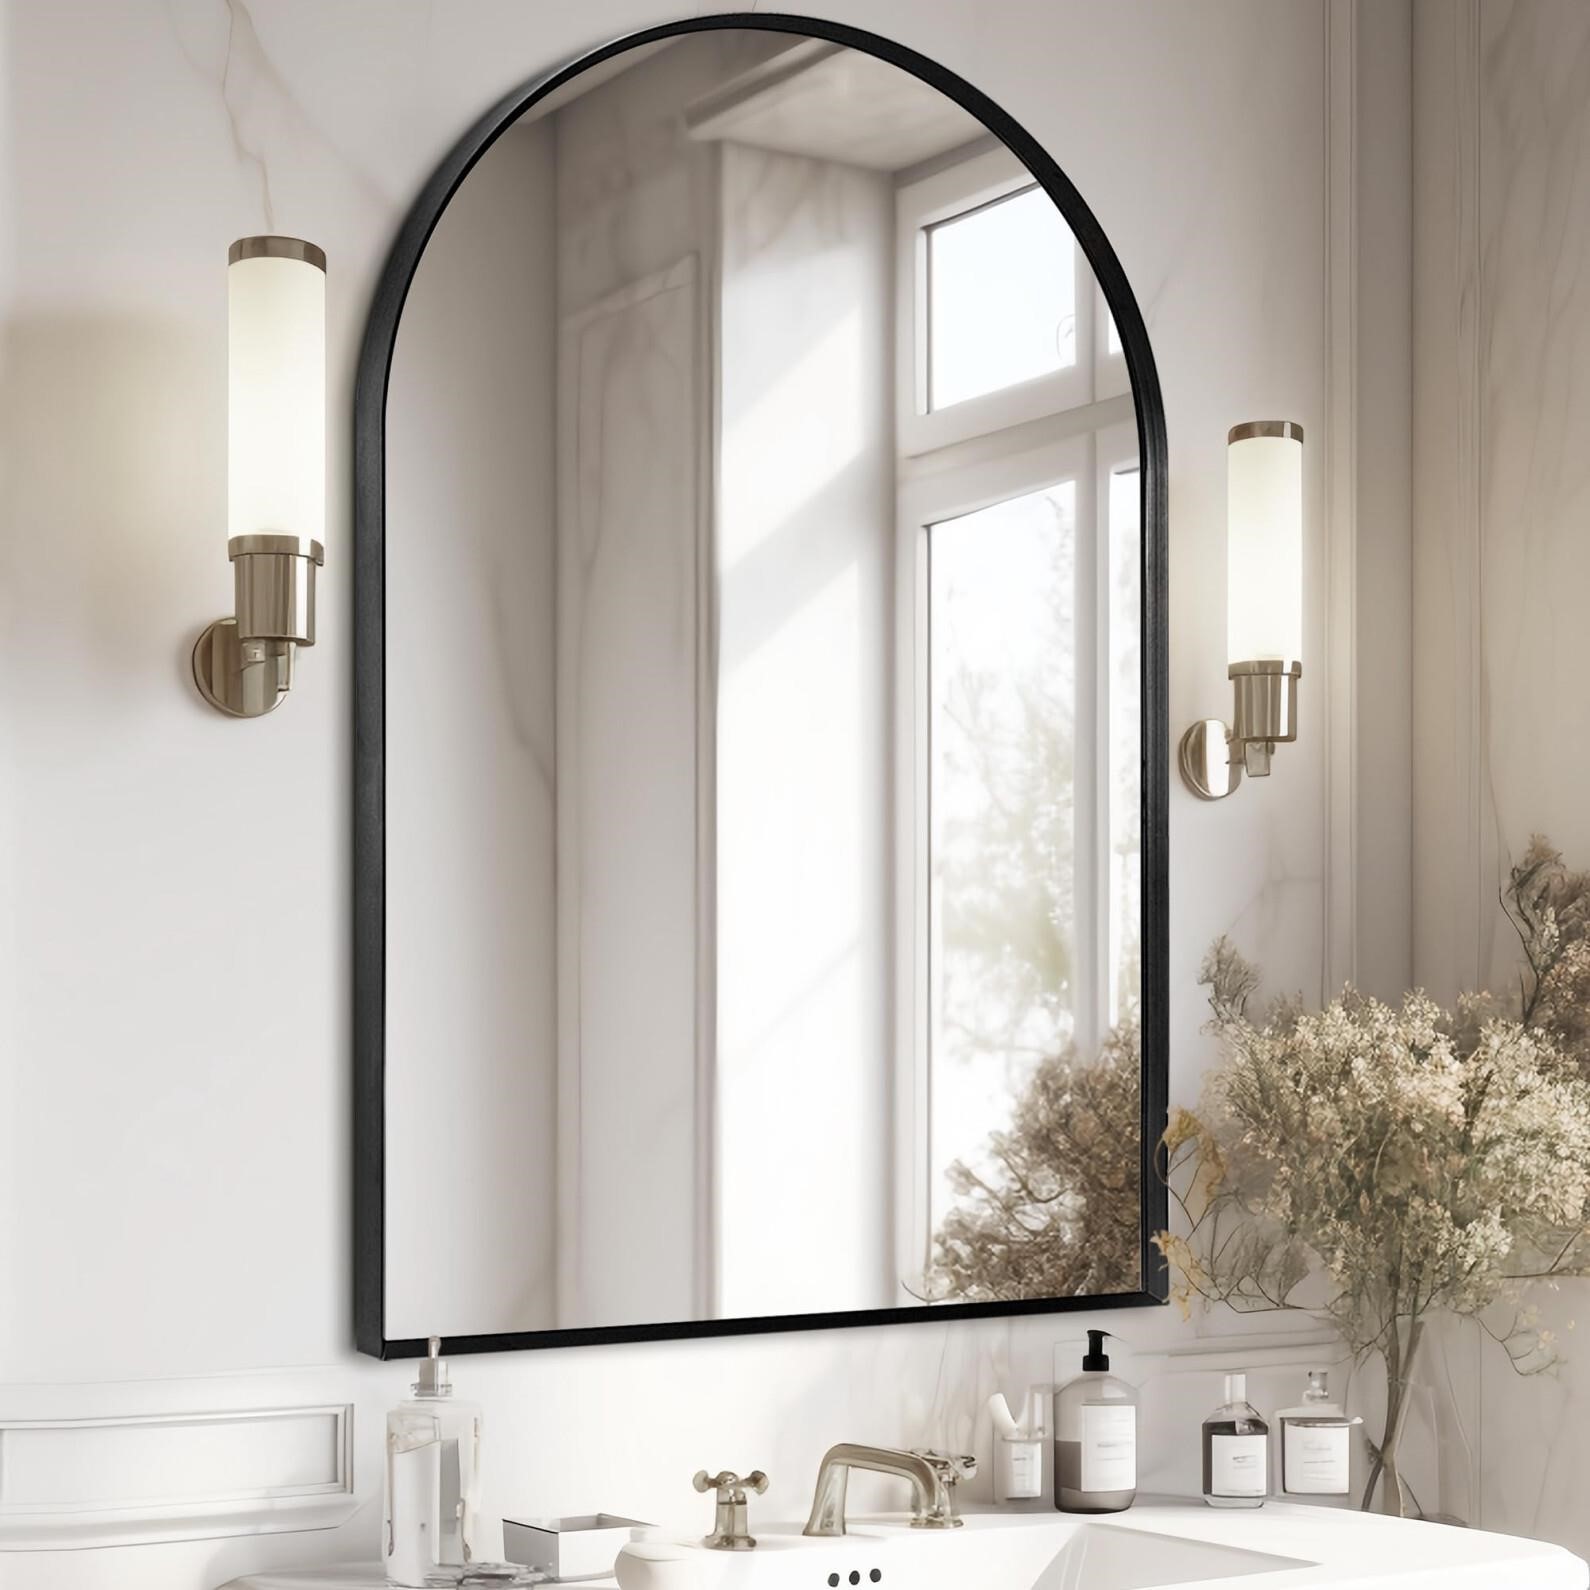 Minuover Large Black Arched Mirror, 30" x 40" Mod